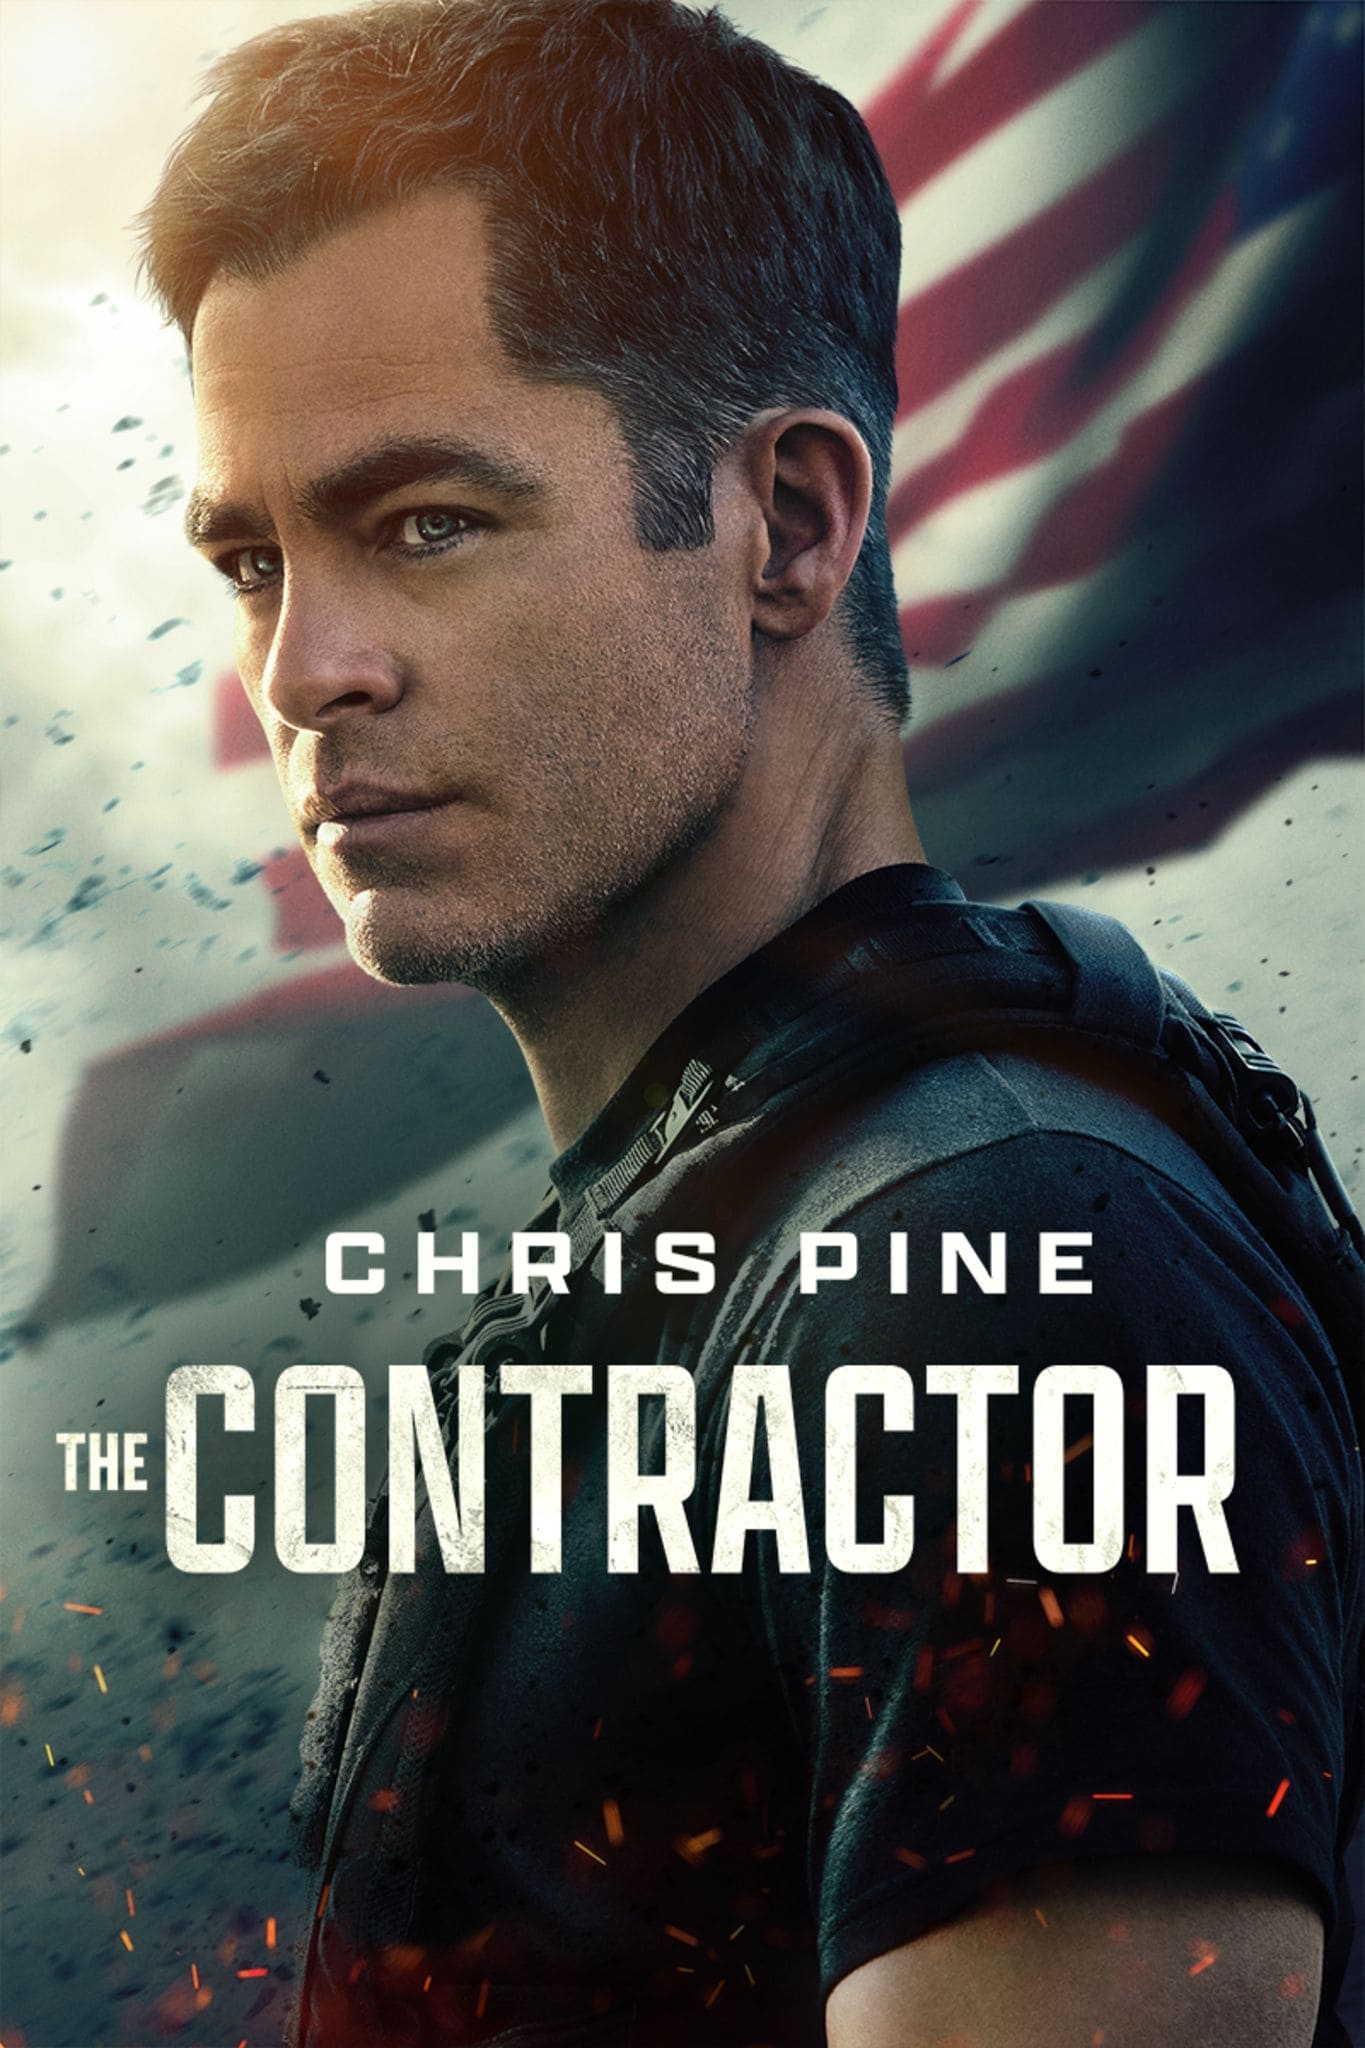 The Contractor [HD] (2022)